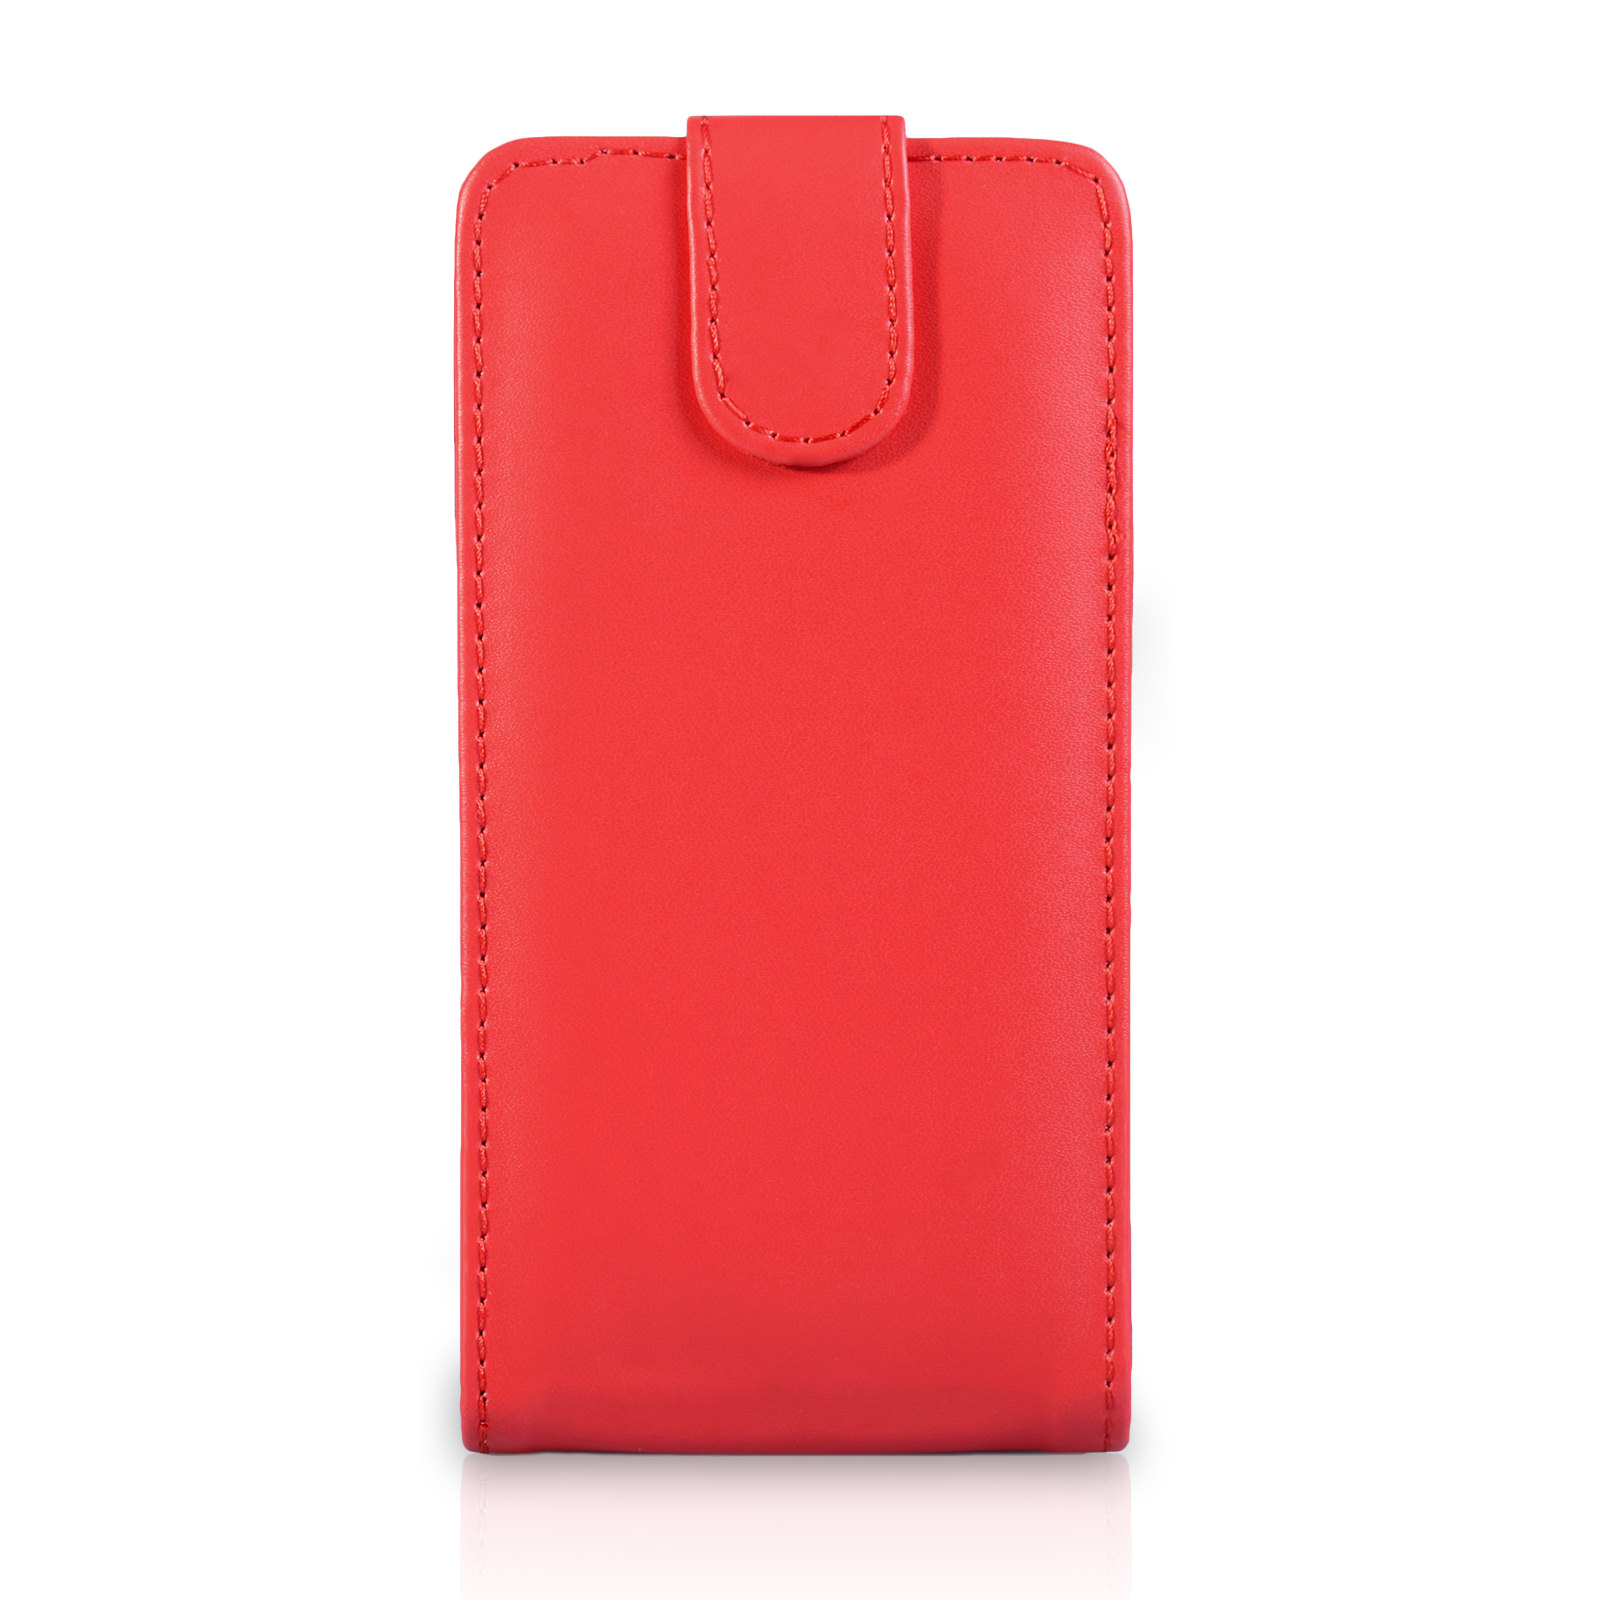 YouSave Accessories Samsung Galaxy S5 Leather-Effect Flip Case - Red